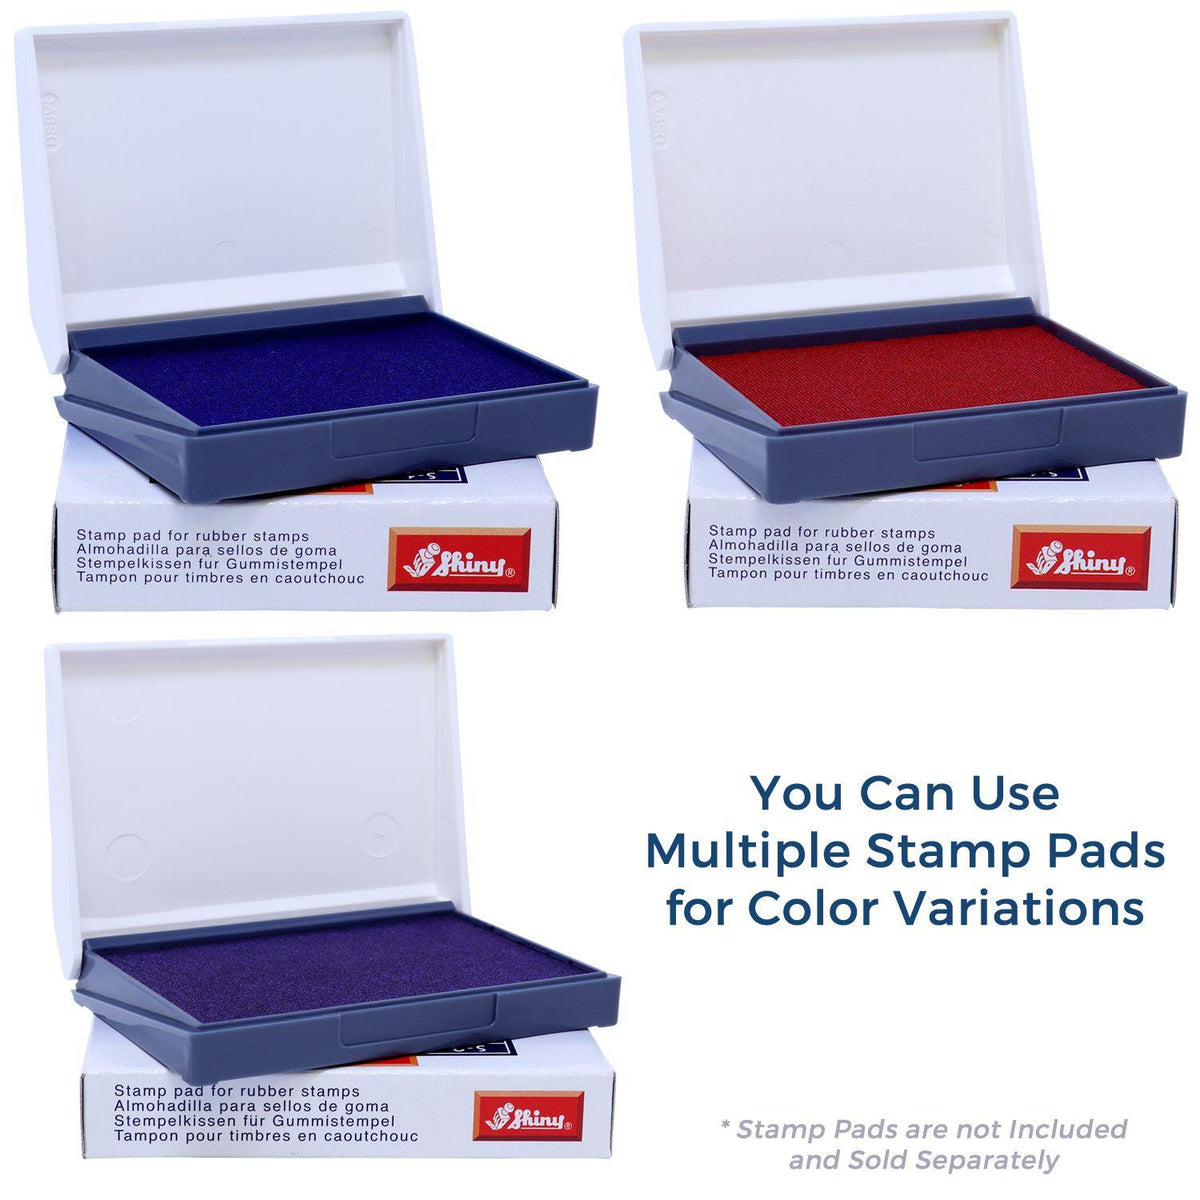 Stamp Pads for Distributed Rubber Stamp Available